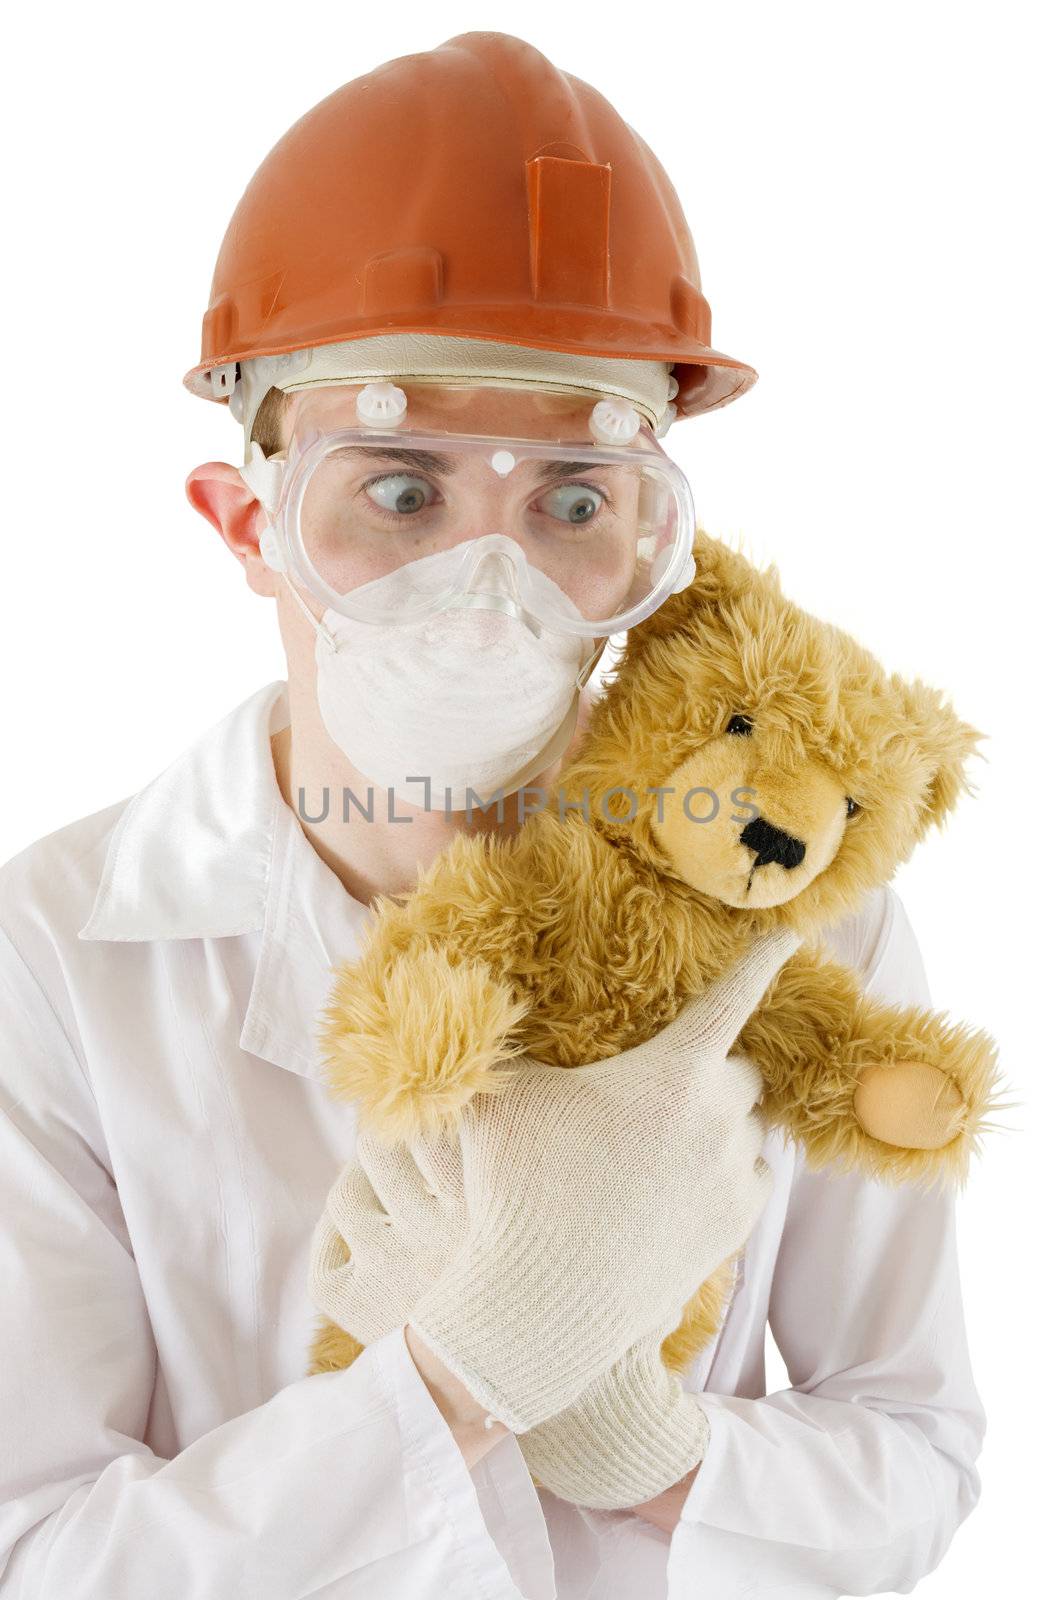 Scientist holding toy bear in hands on the white background